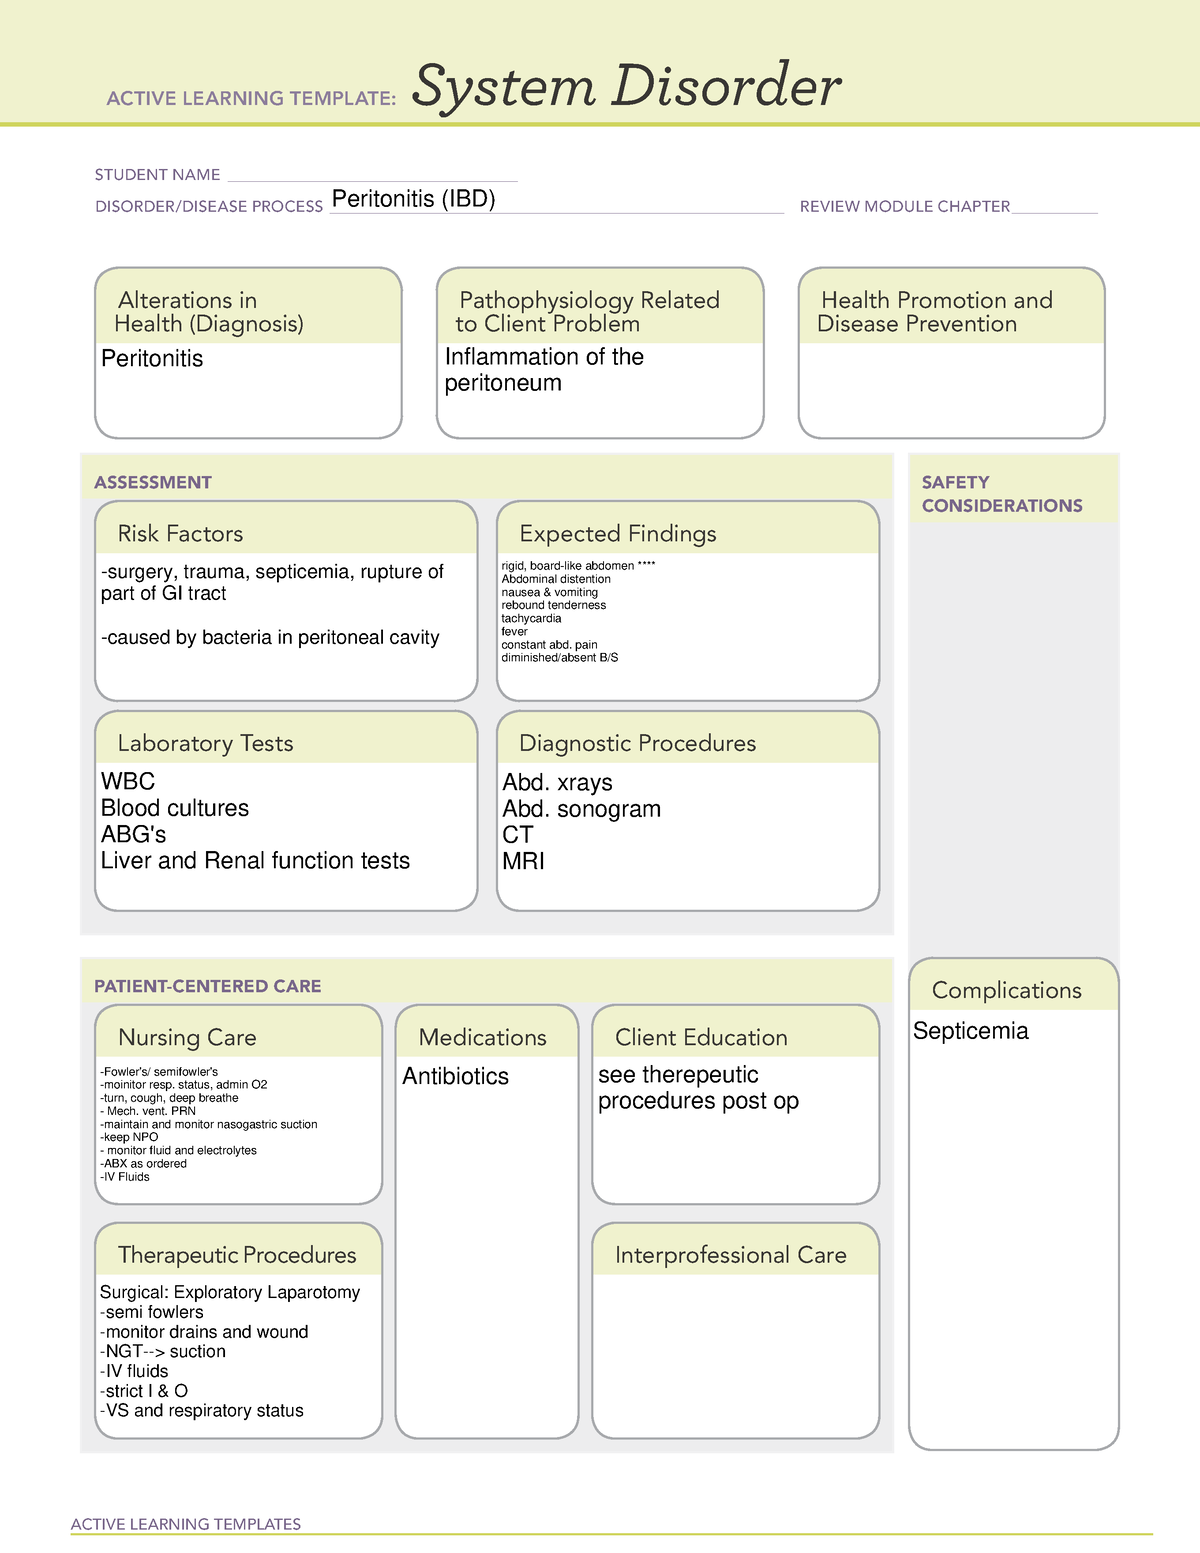 2019 ATI System Disorder Template- Peritonitis - ACTIVE LEARNING ...